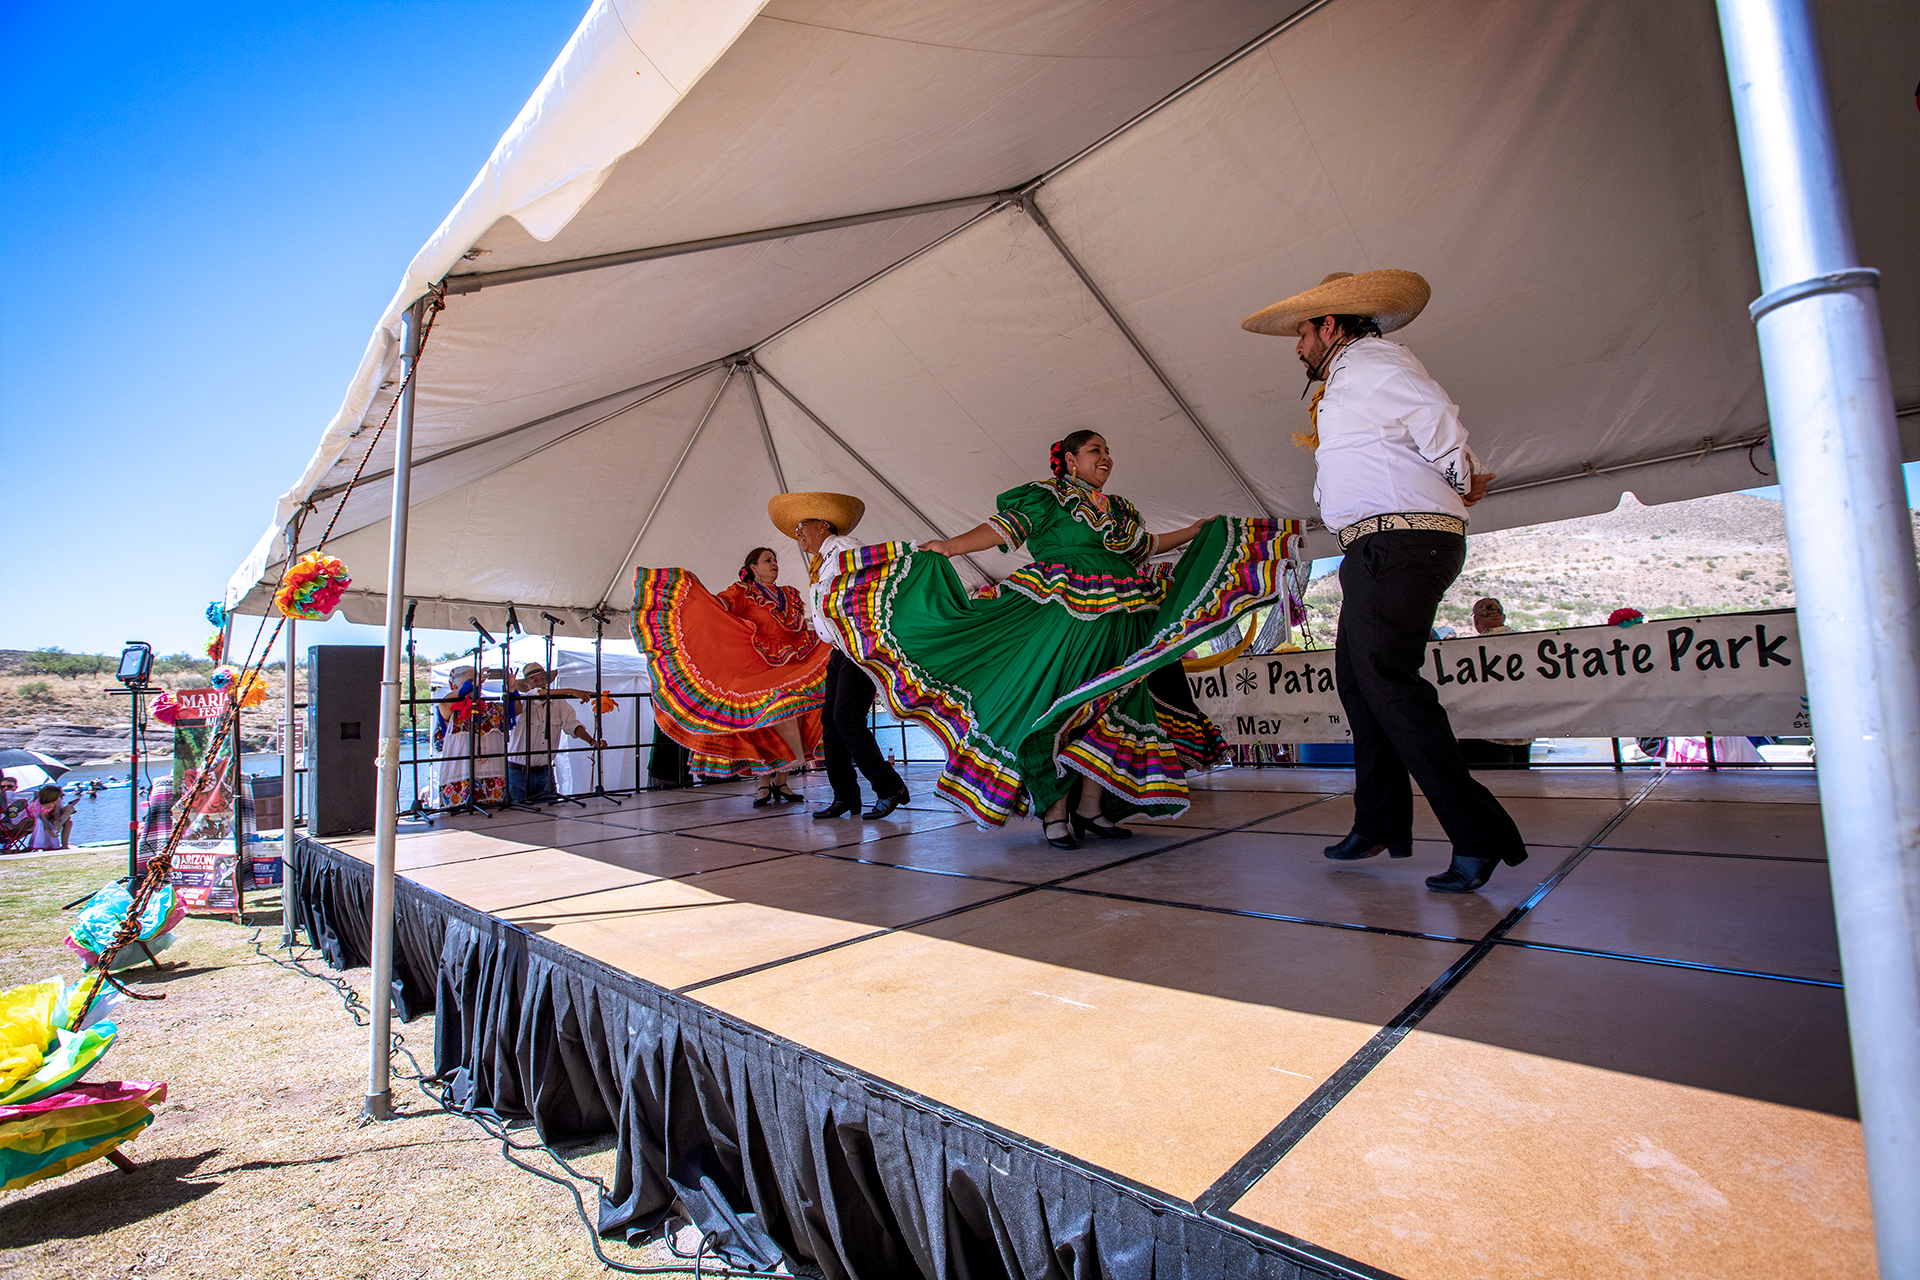 Mariachi dancers wearing colorful dresses and white shirts and sombreros dance on a stage.